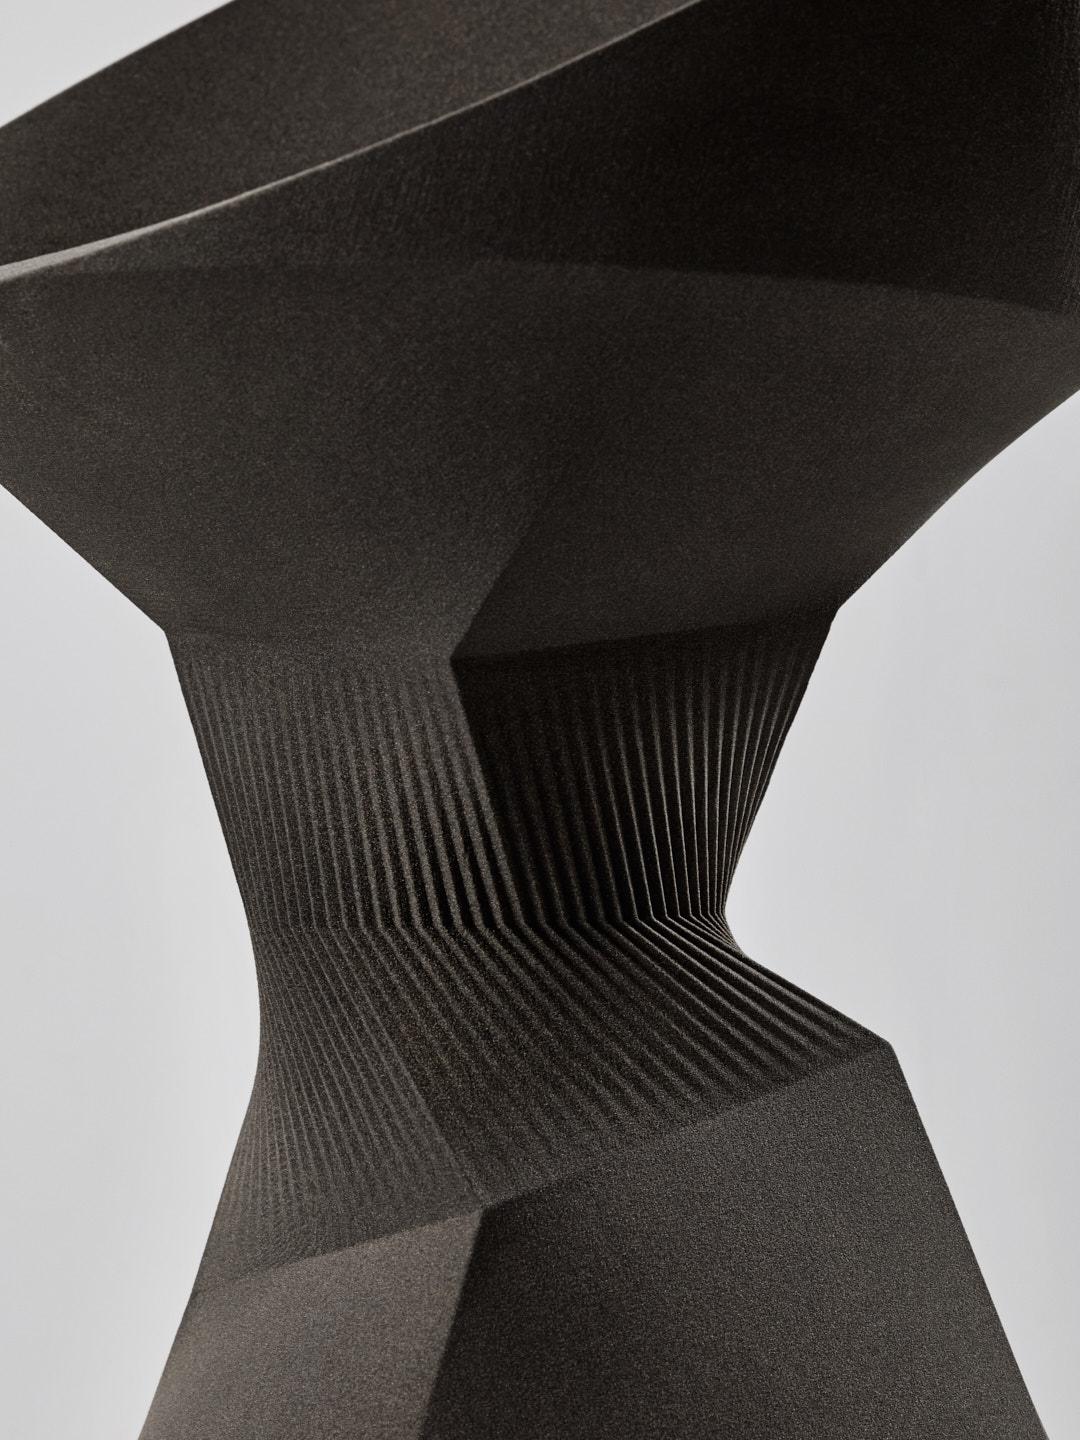 Other Pleat Chair, 3d Printed Sand – by Rive Roshan For Sale